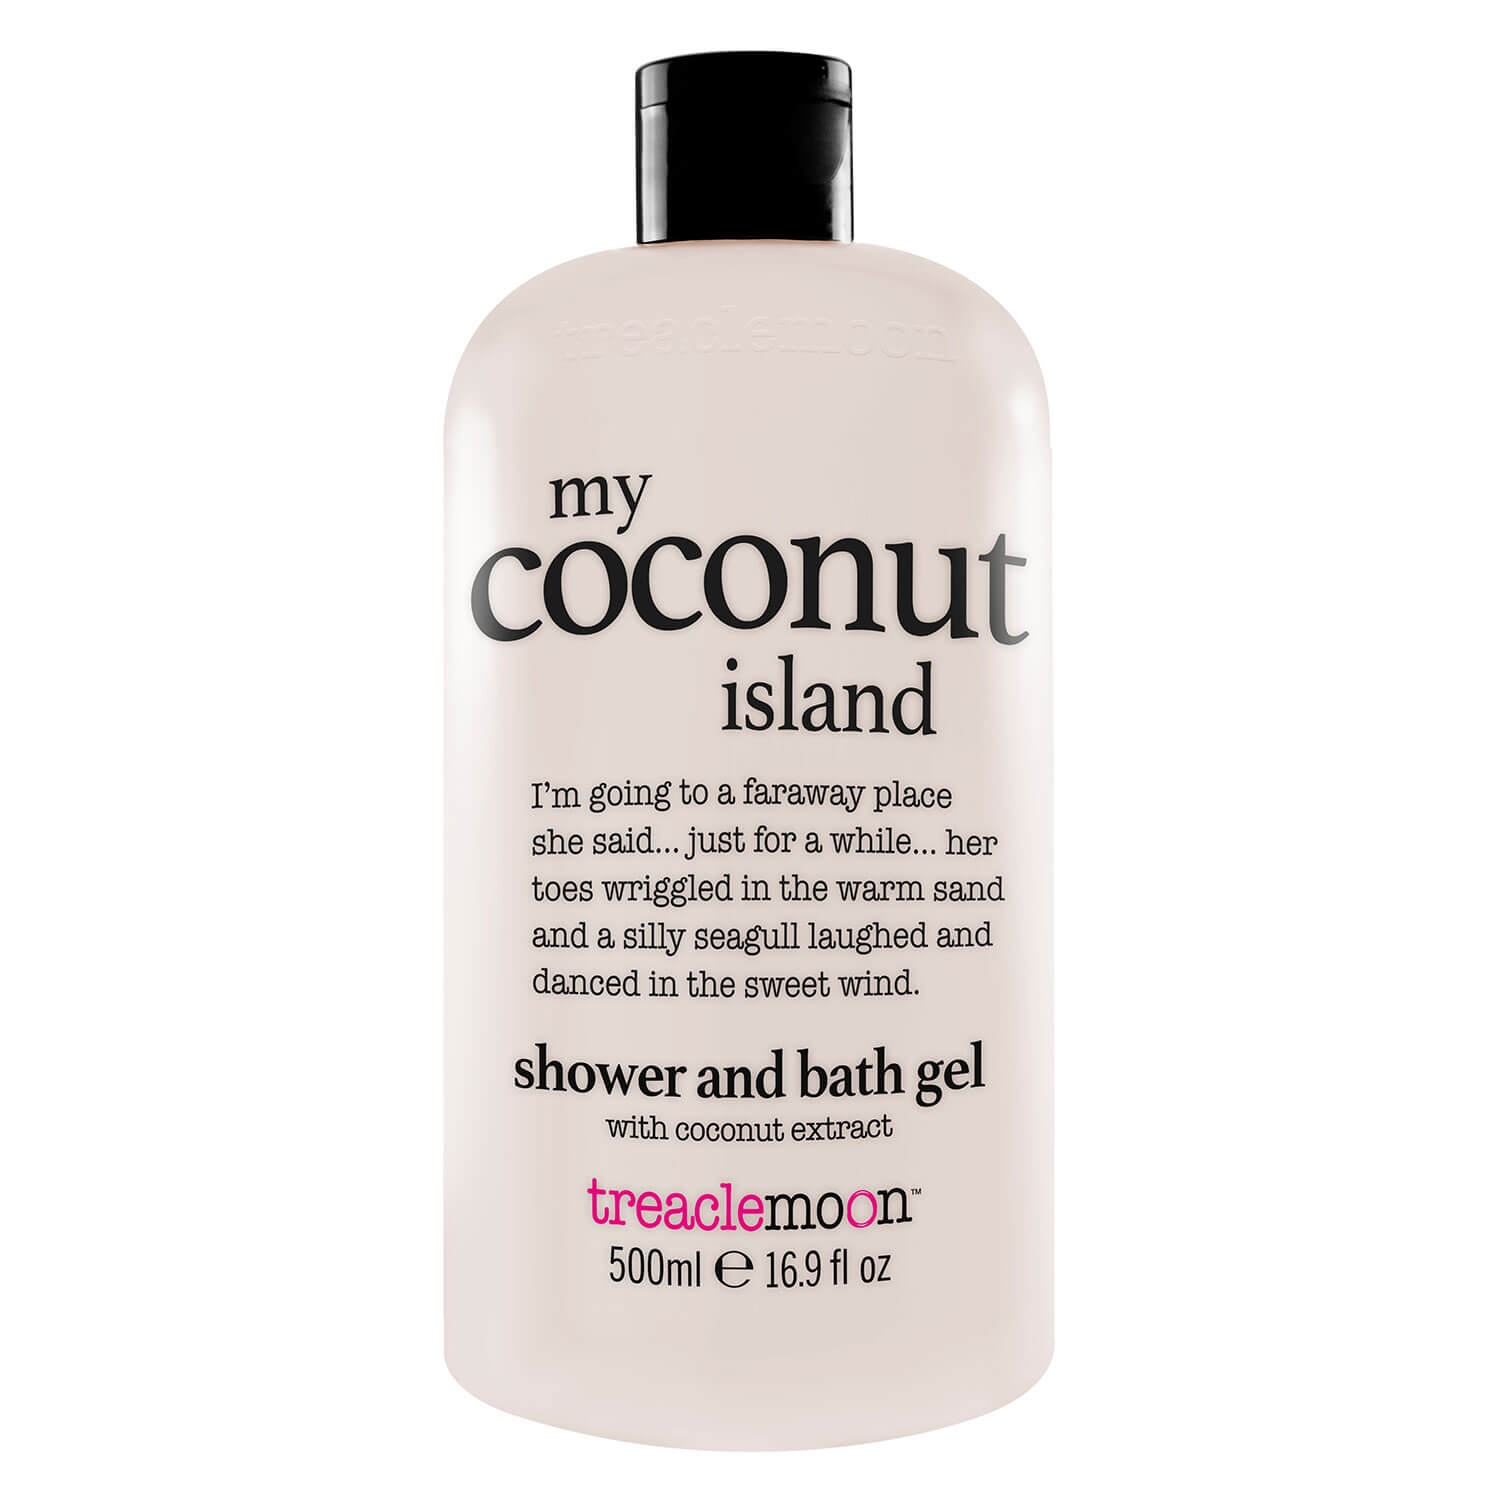 Product image from treaclemoon - my coconut island shower and bath gel